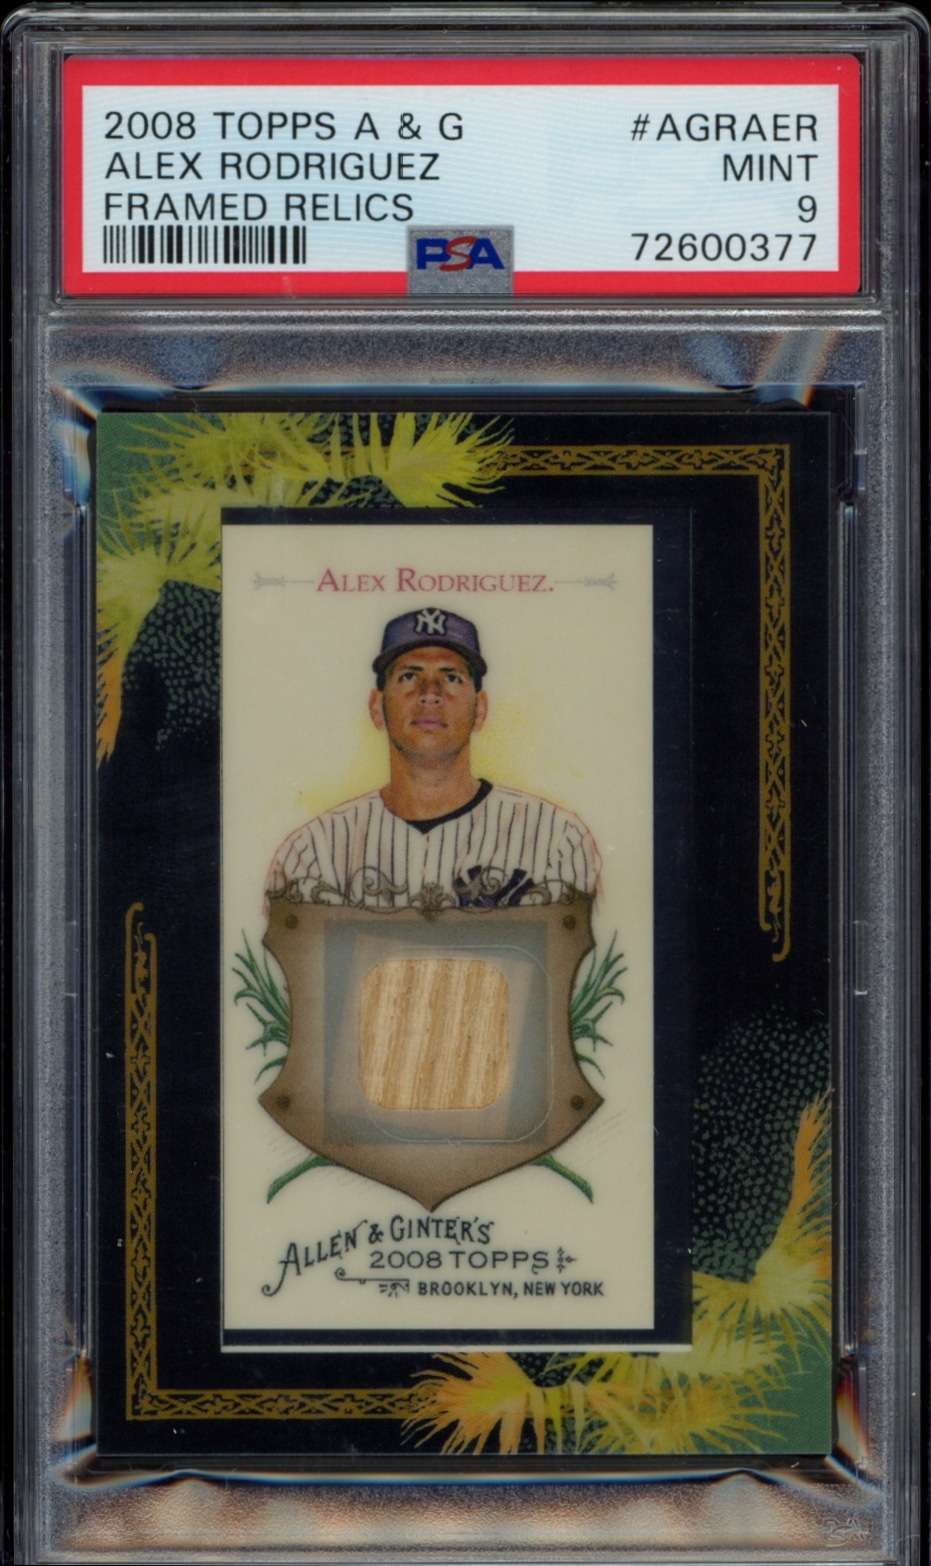 Mint 2008 Topps Allen & Ginter Alex Rodriguez card with game-used jersey relic, PSA graded 9.